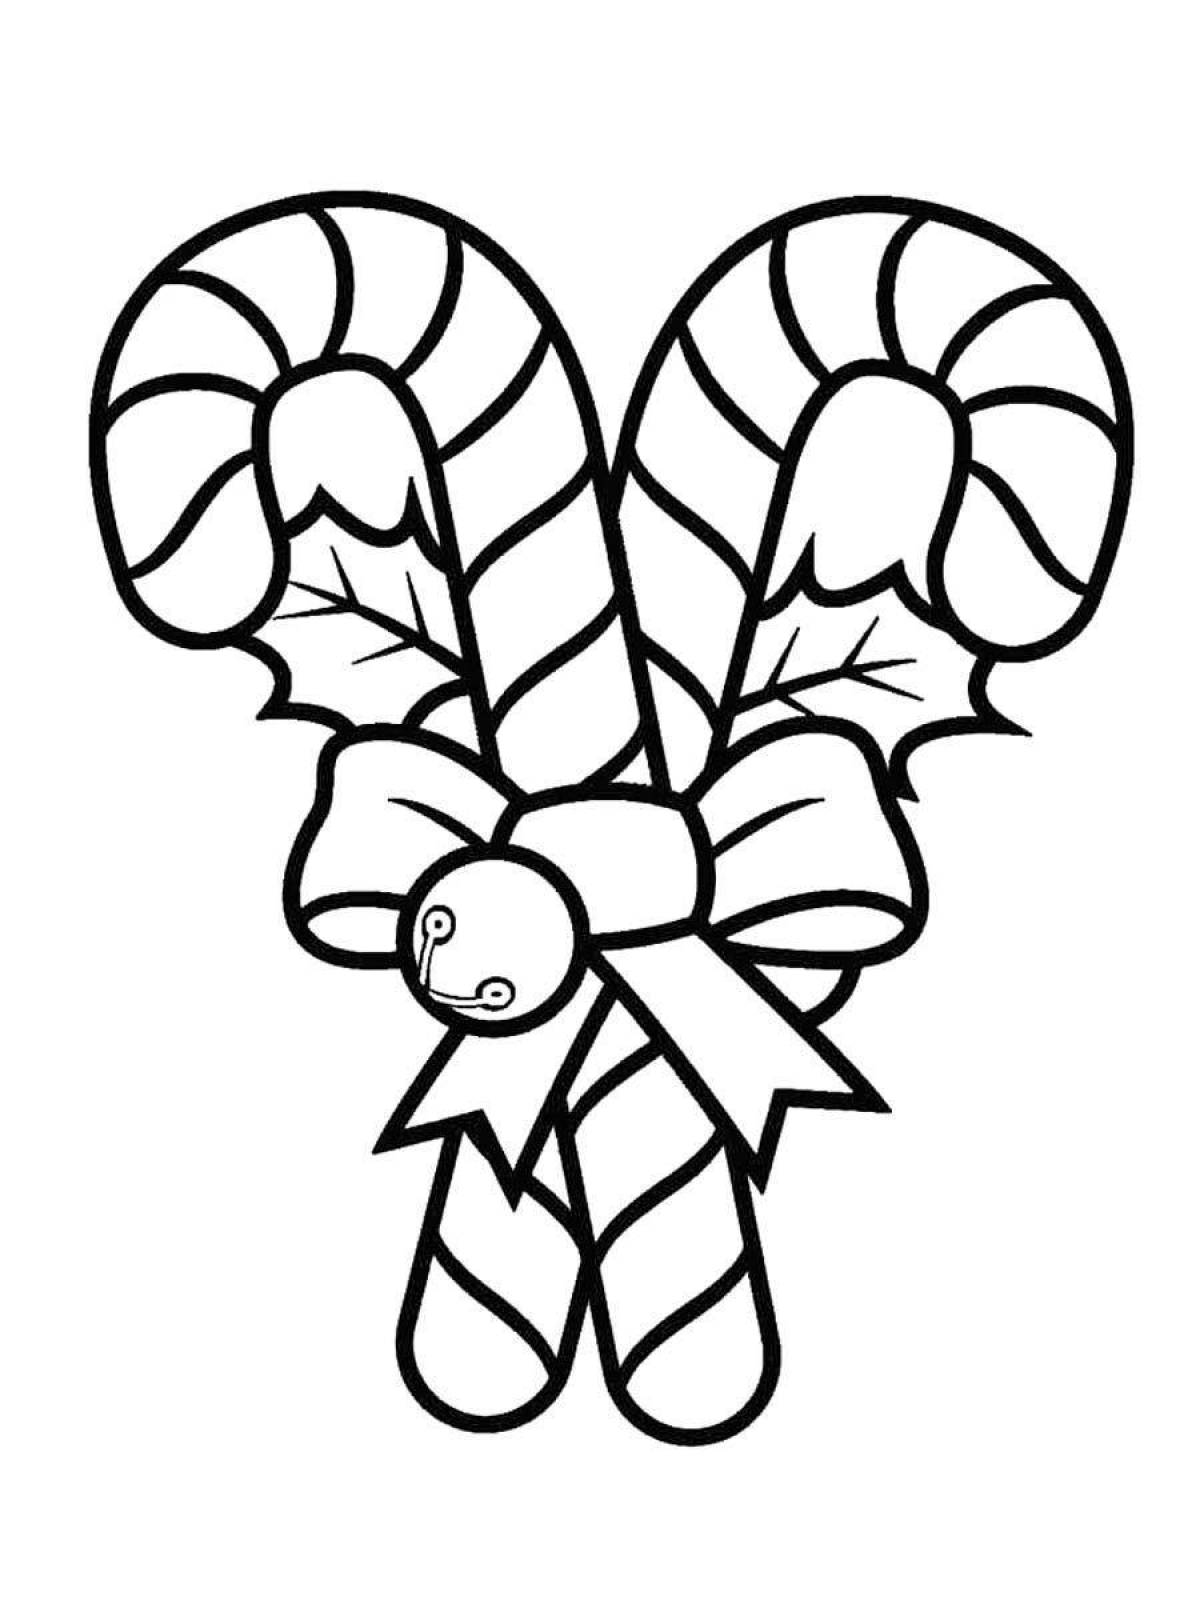 Shiny candy cane coloring page